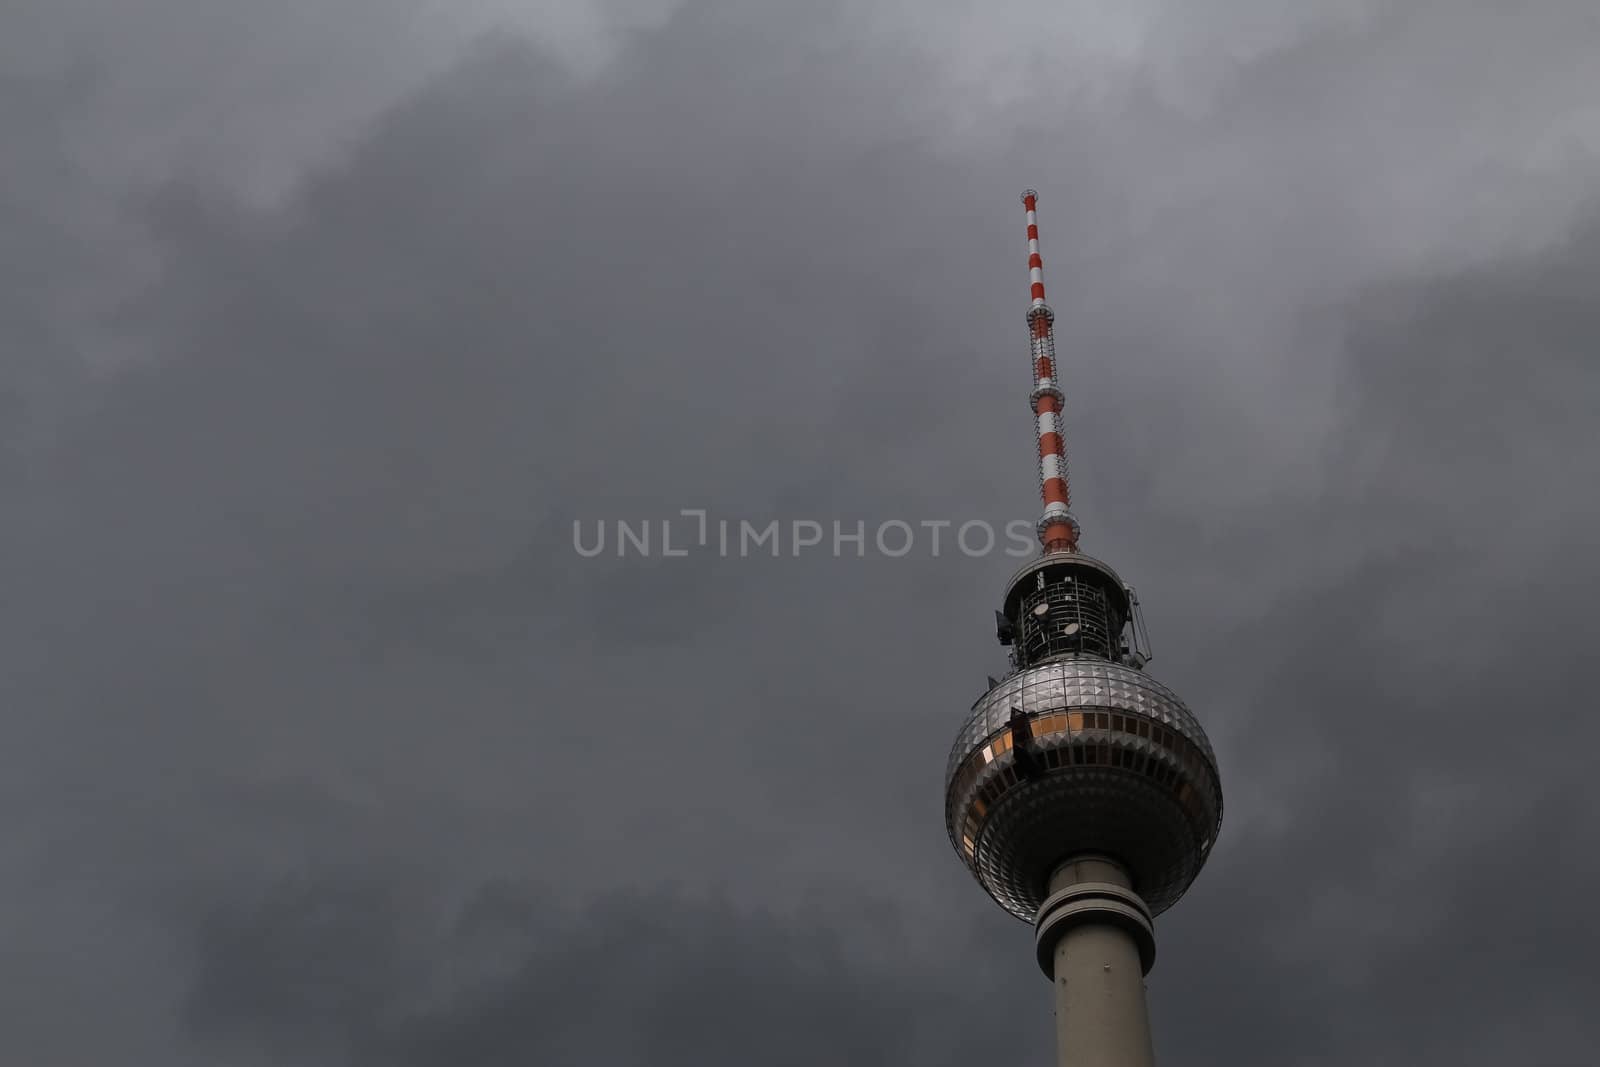 Berlin's broadcasting tower named Alex on dark clouds before a thunderstorm